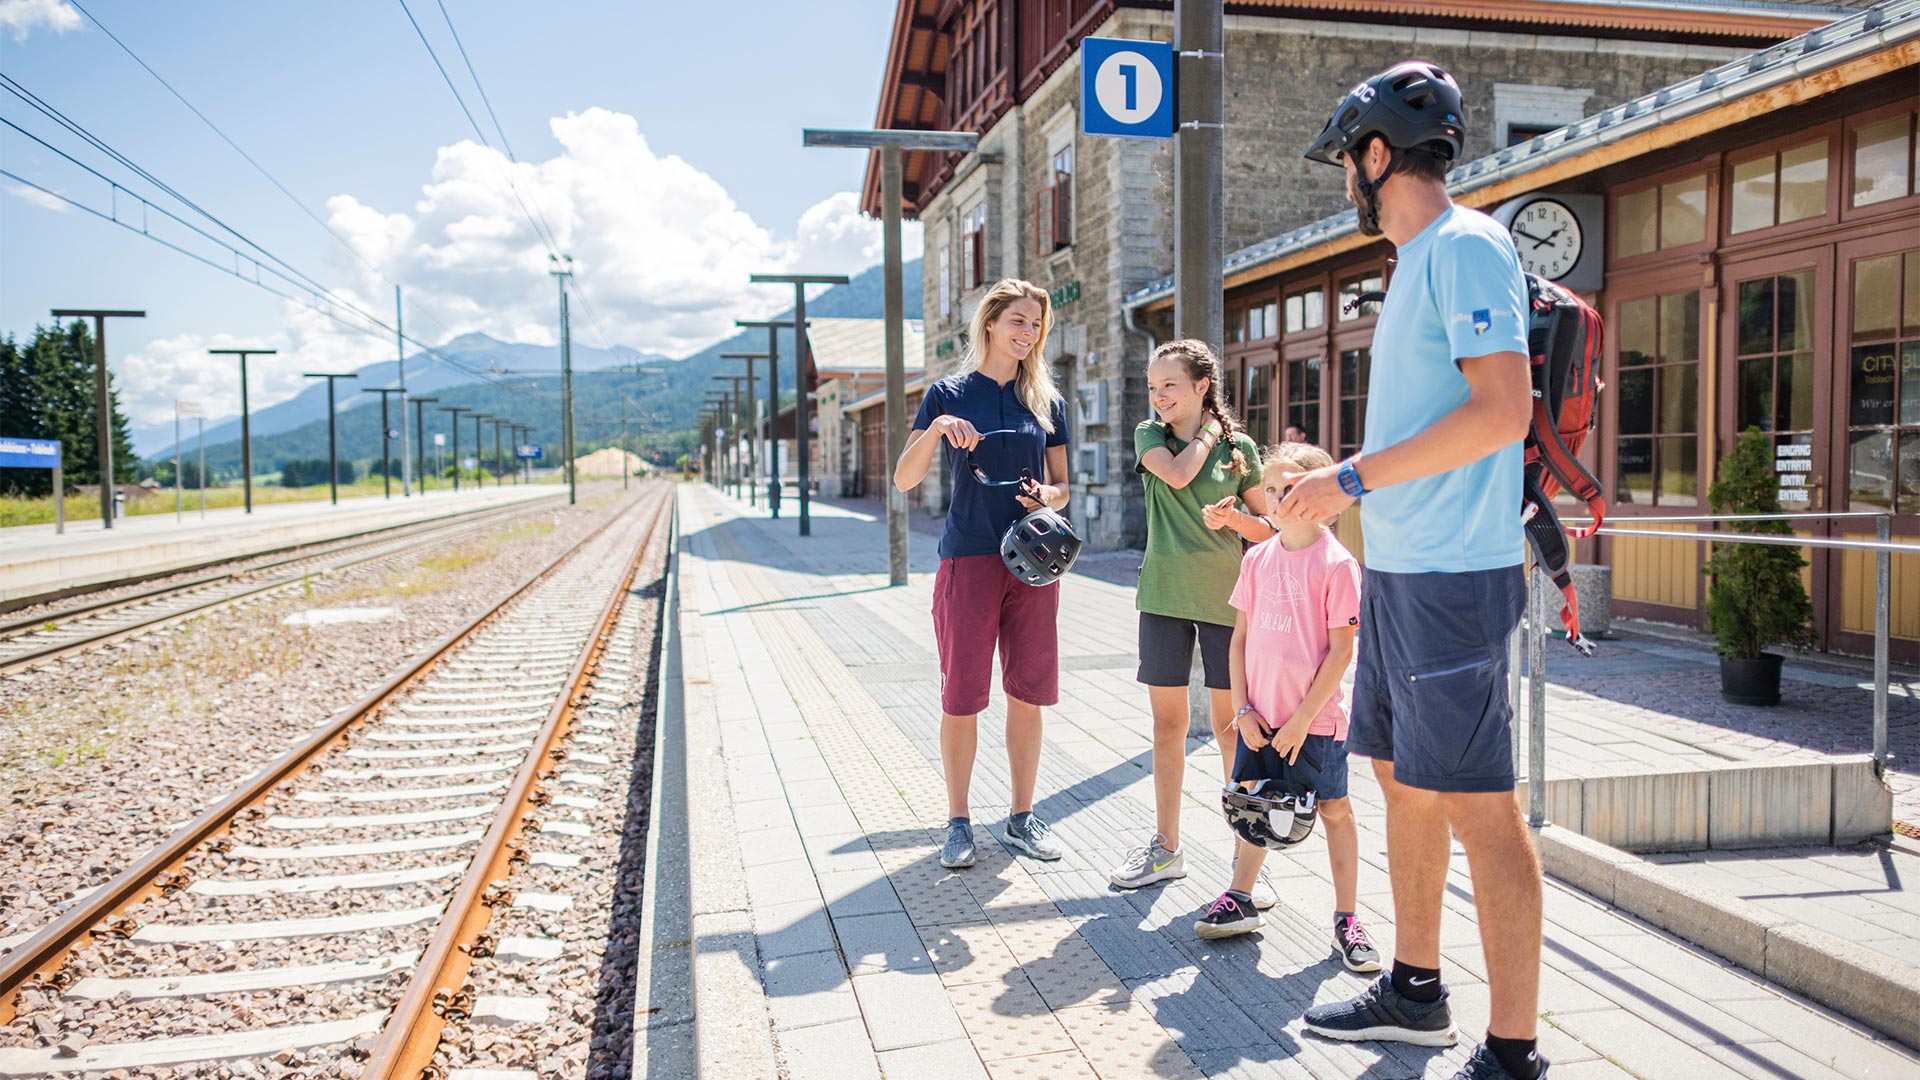 A family, who have finished their activities on their bicycles, is standing at the railway station waiting for the train to arrive.